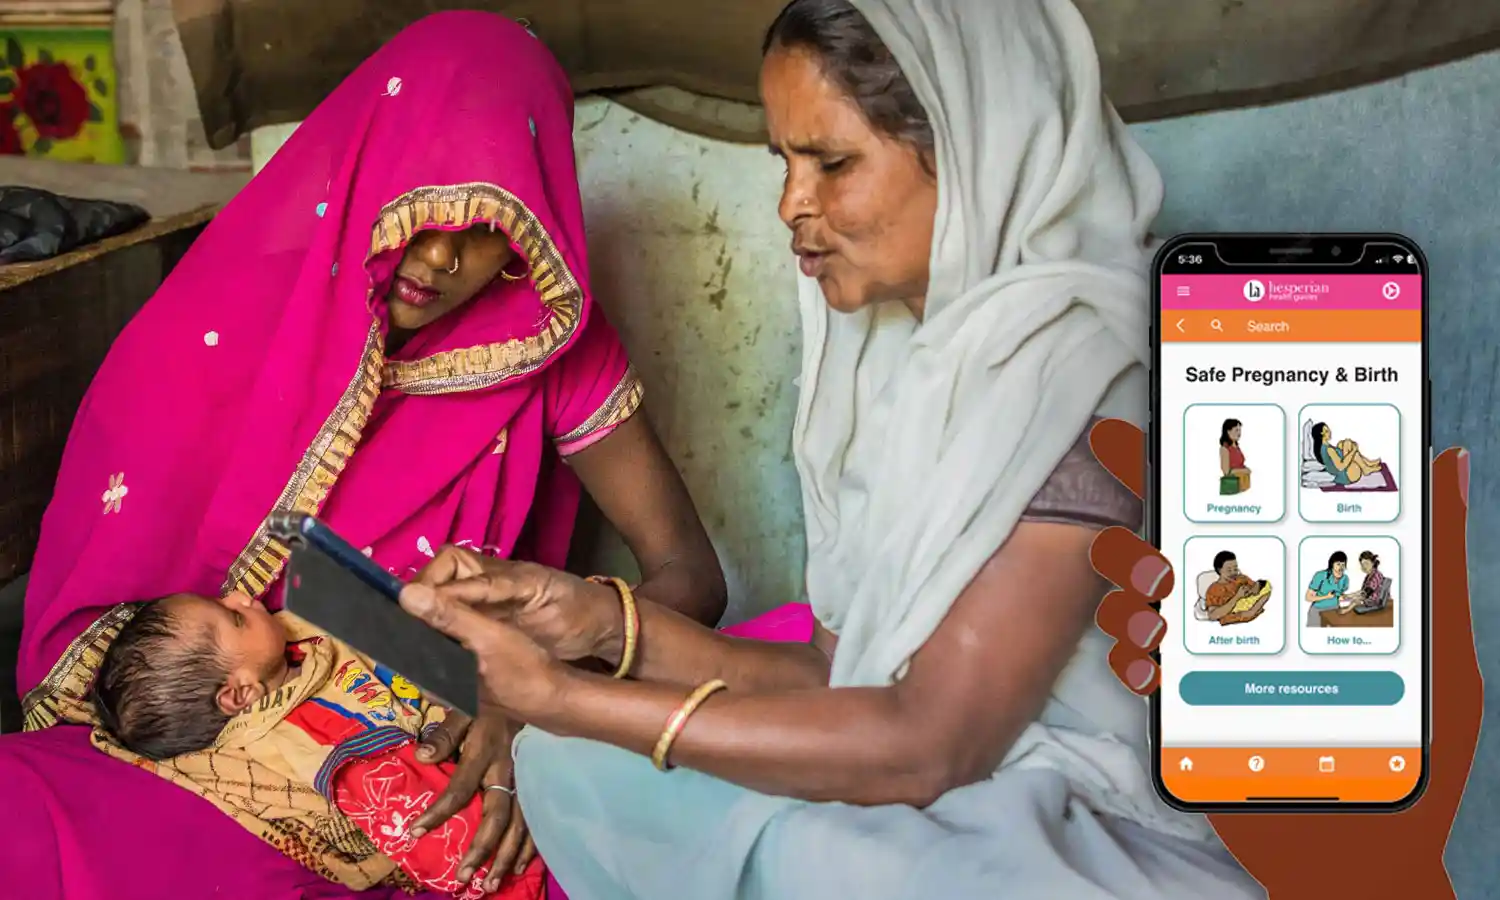 Two women look at a mobile phone together while one carries a newborn baby in lap. On top of this photo is an image of a hand holding a mobile phone with the home screen of the Safe pregnancy and birth app displayed.